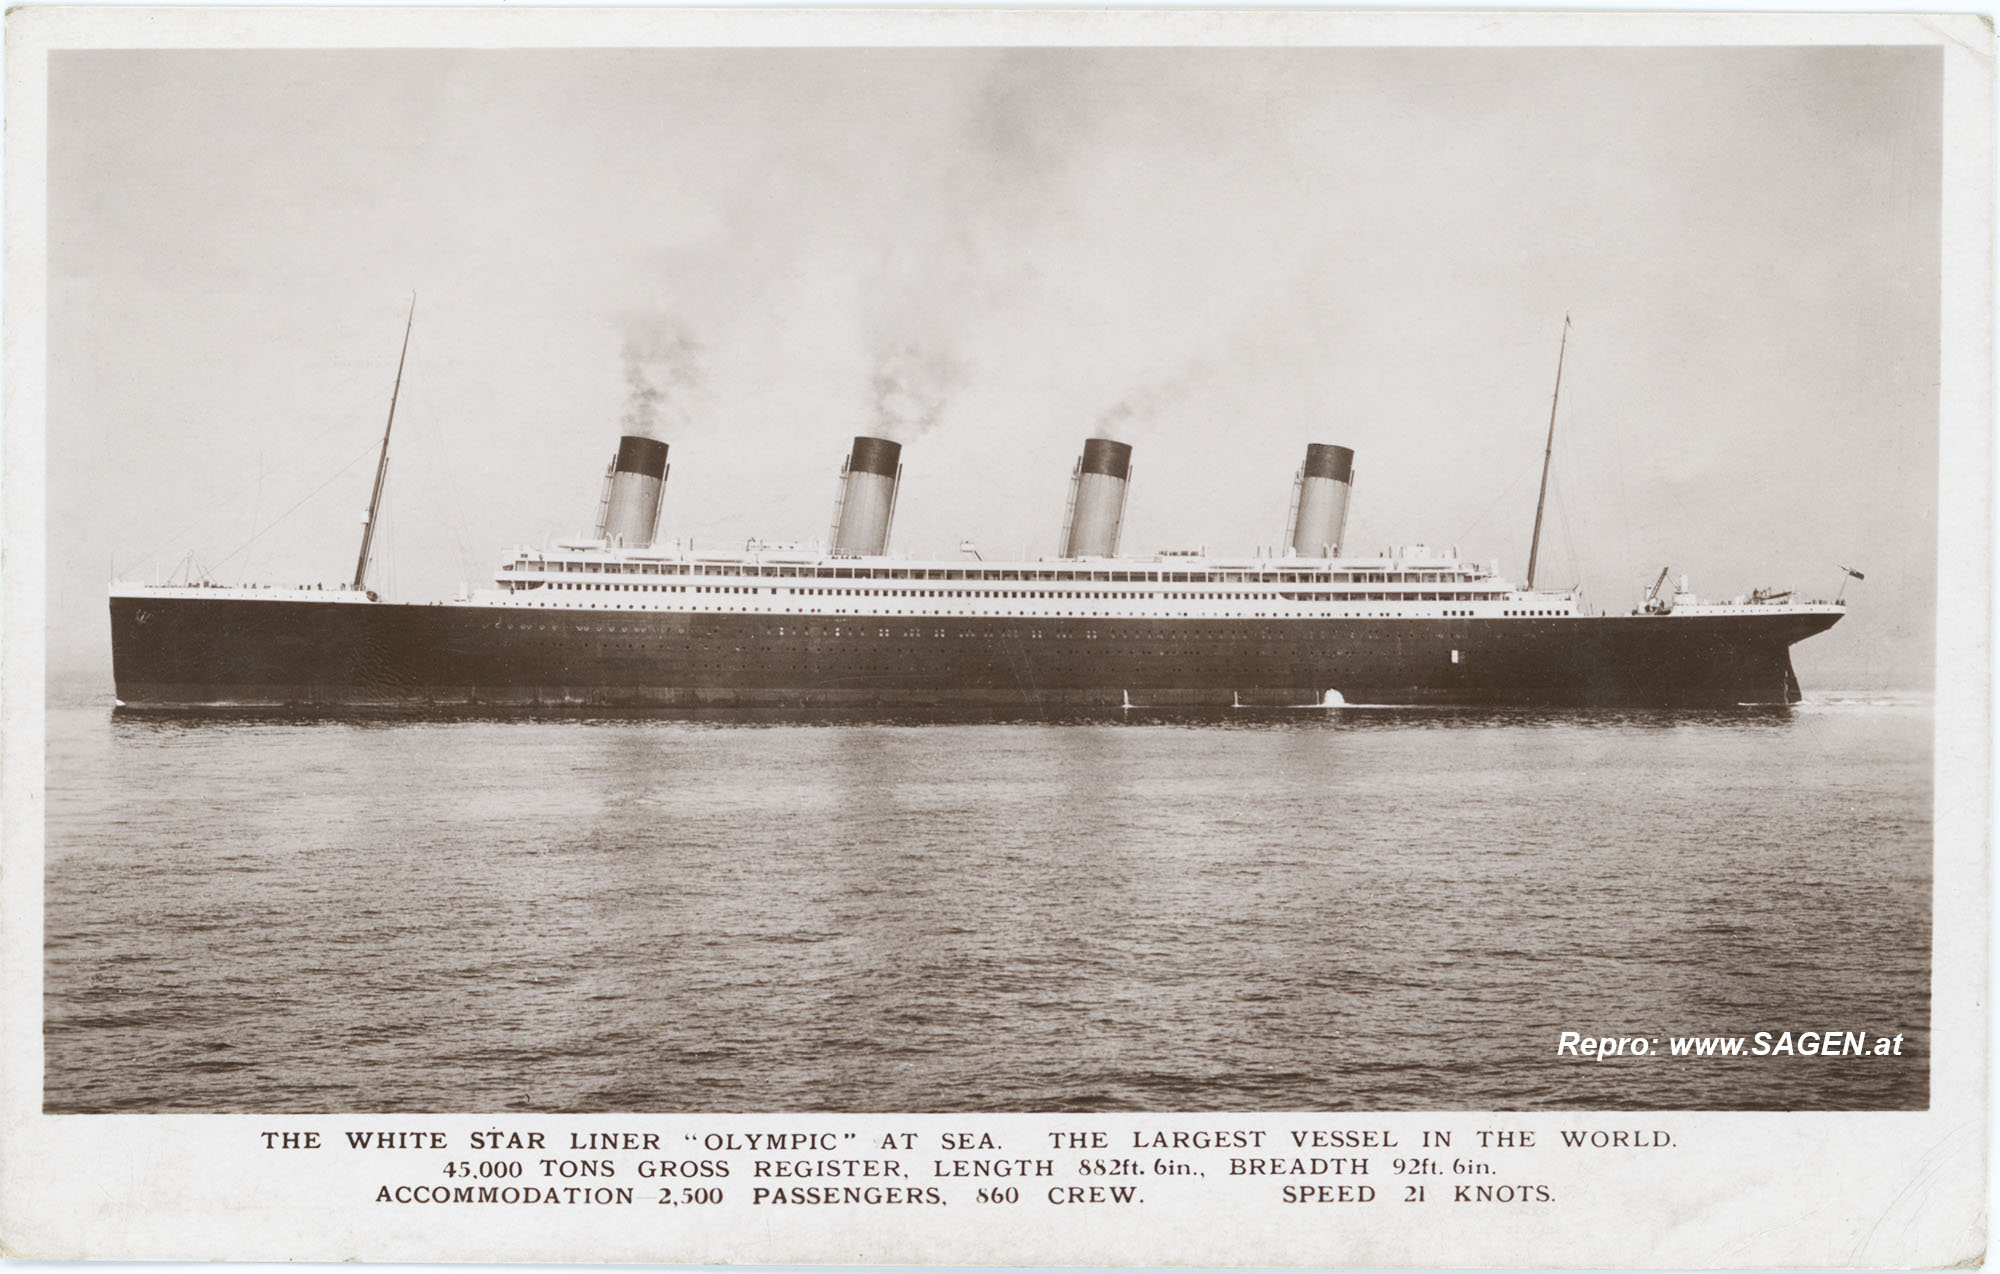 RMS Olympic, The White Star Liner "Olympic" at sea